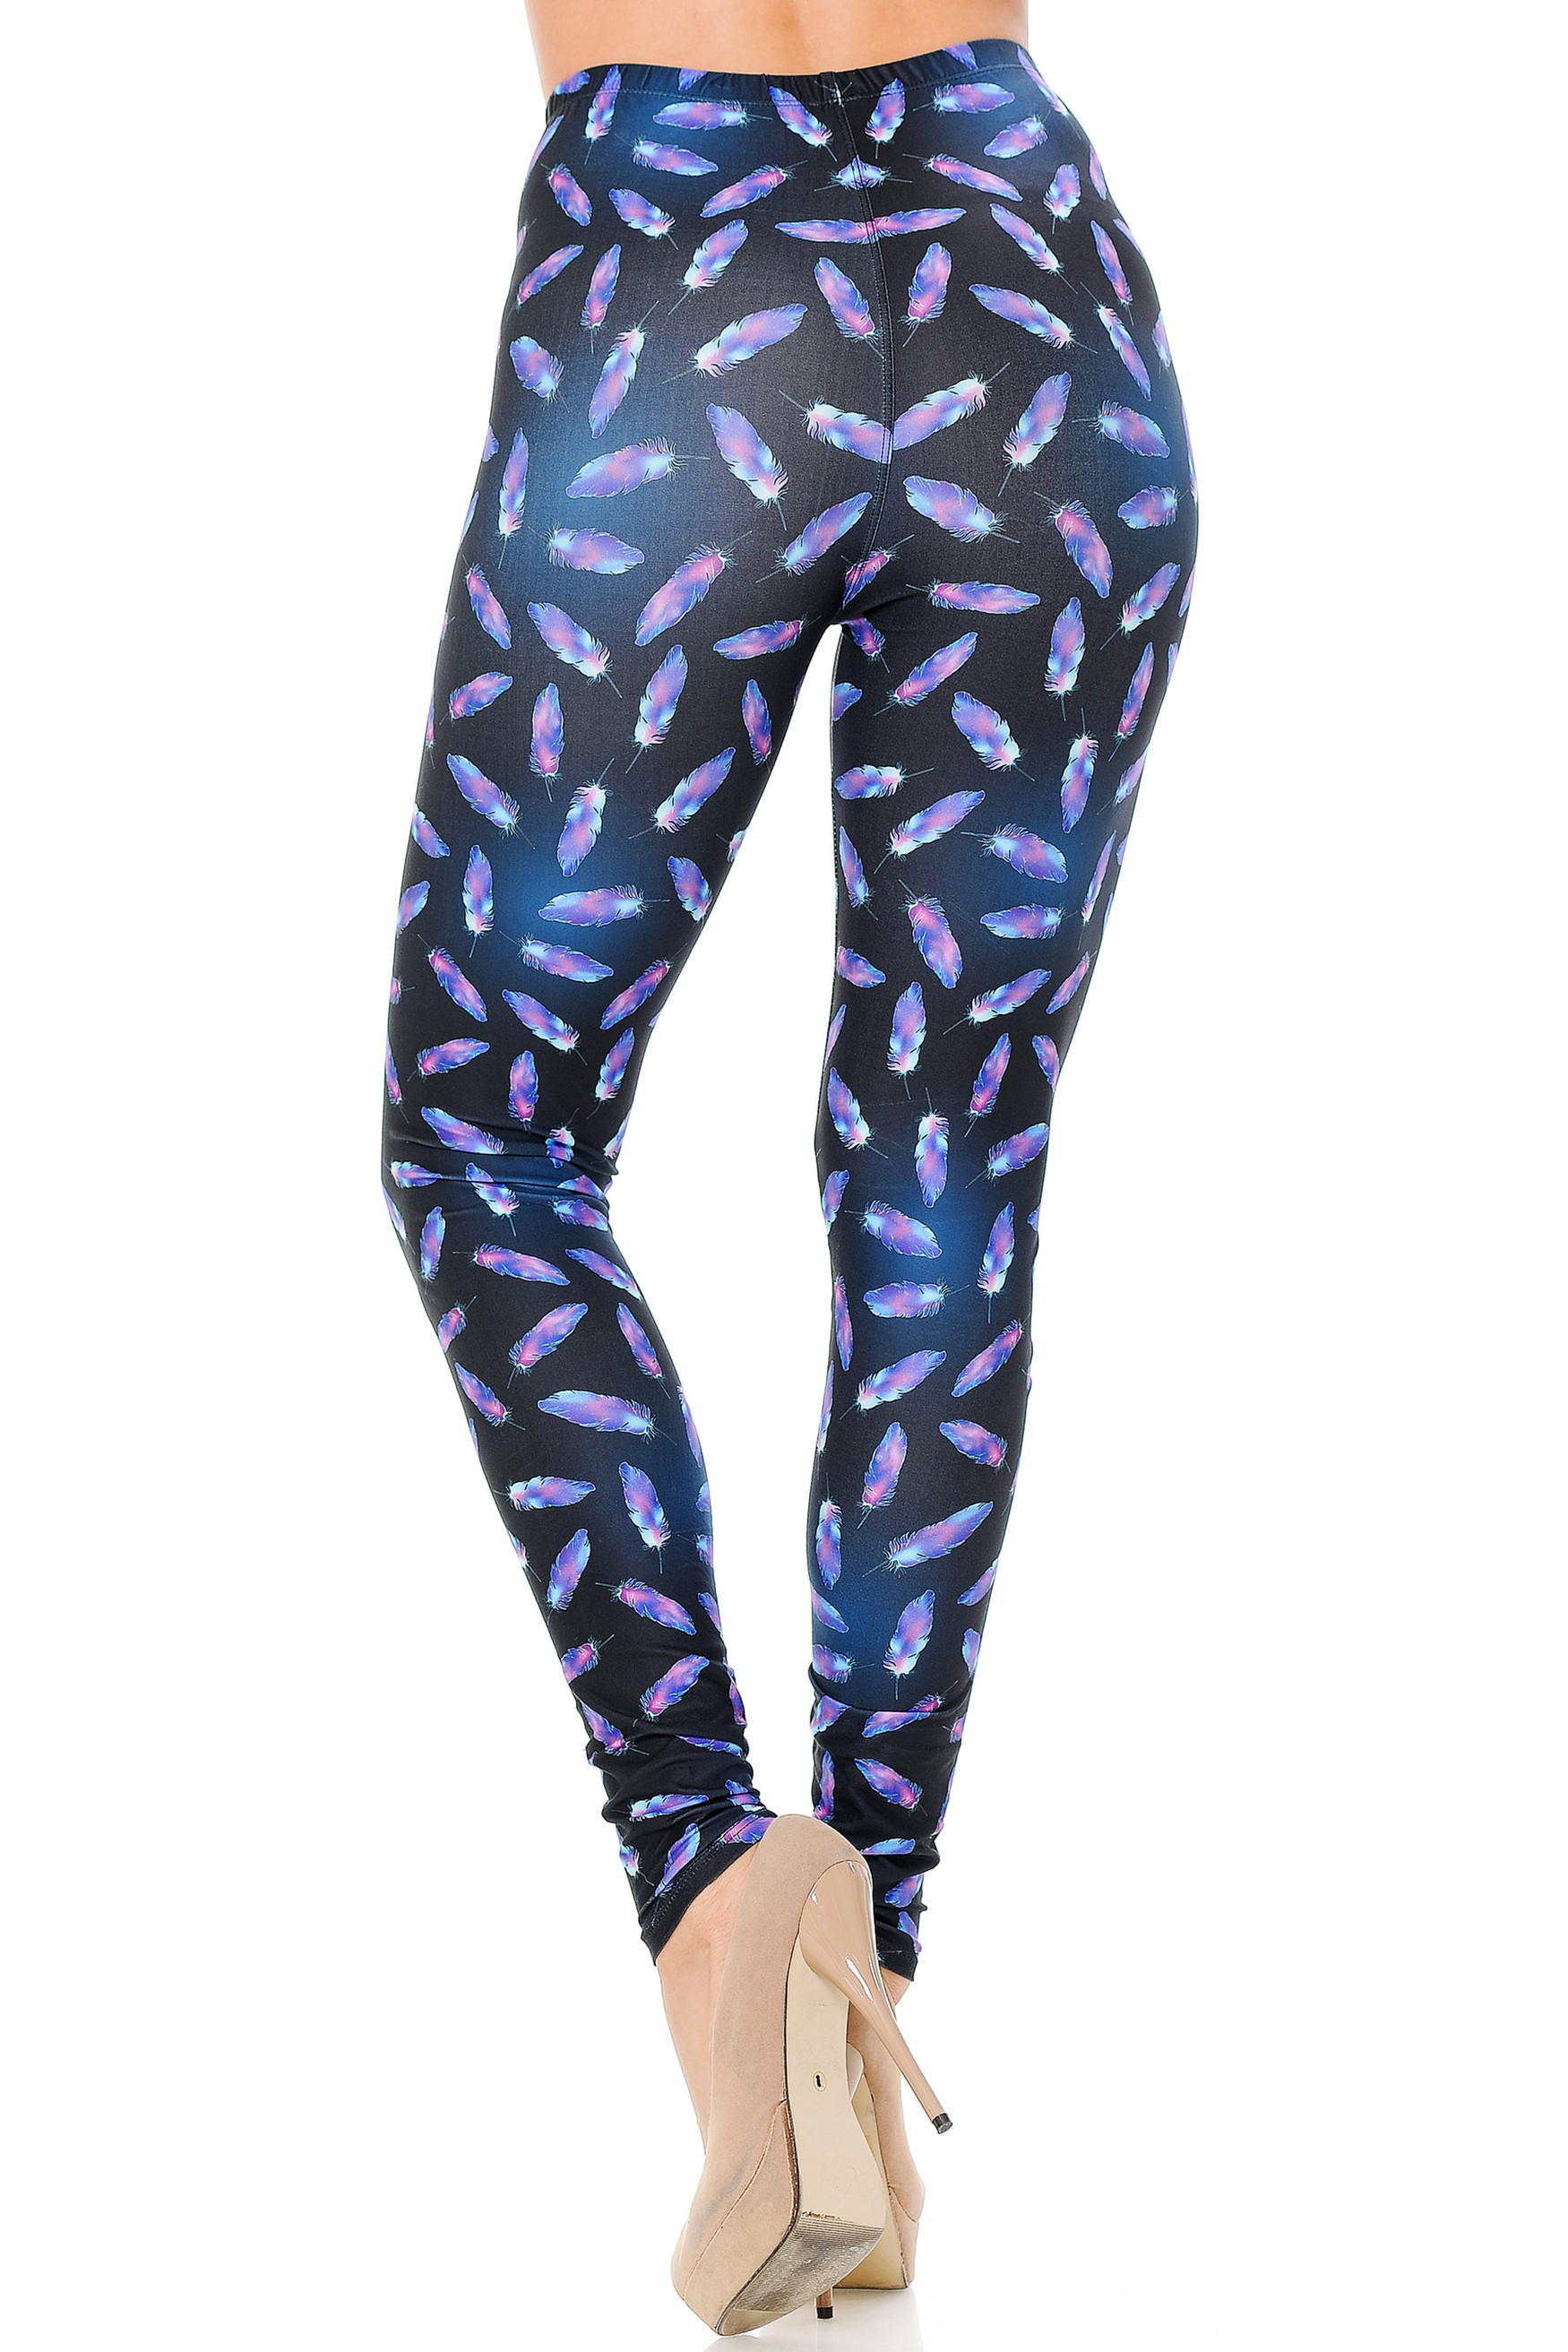 Creamy Soft Glowing Iridescent Feathers Plus Size Leggings